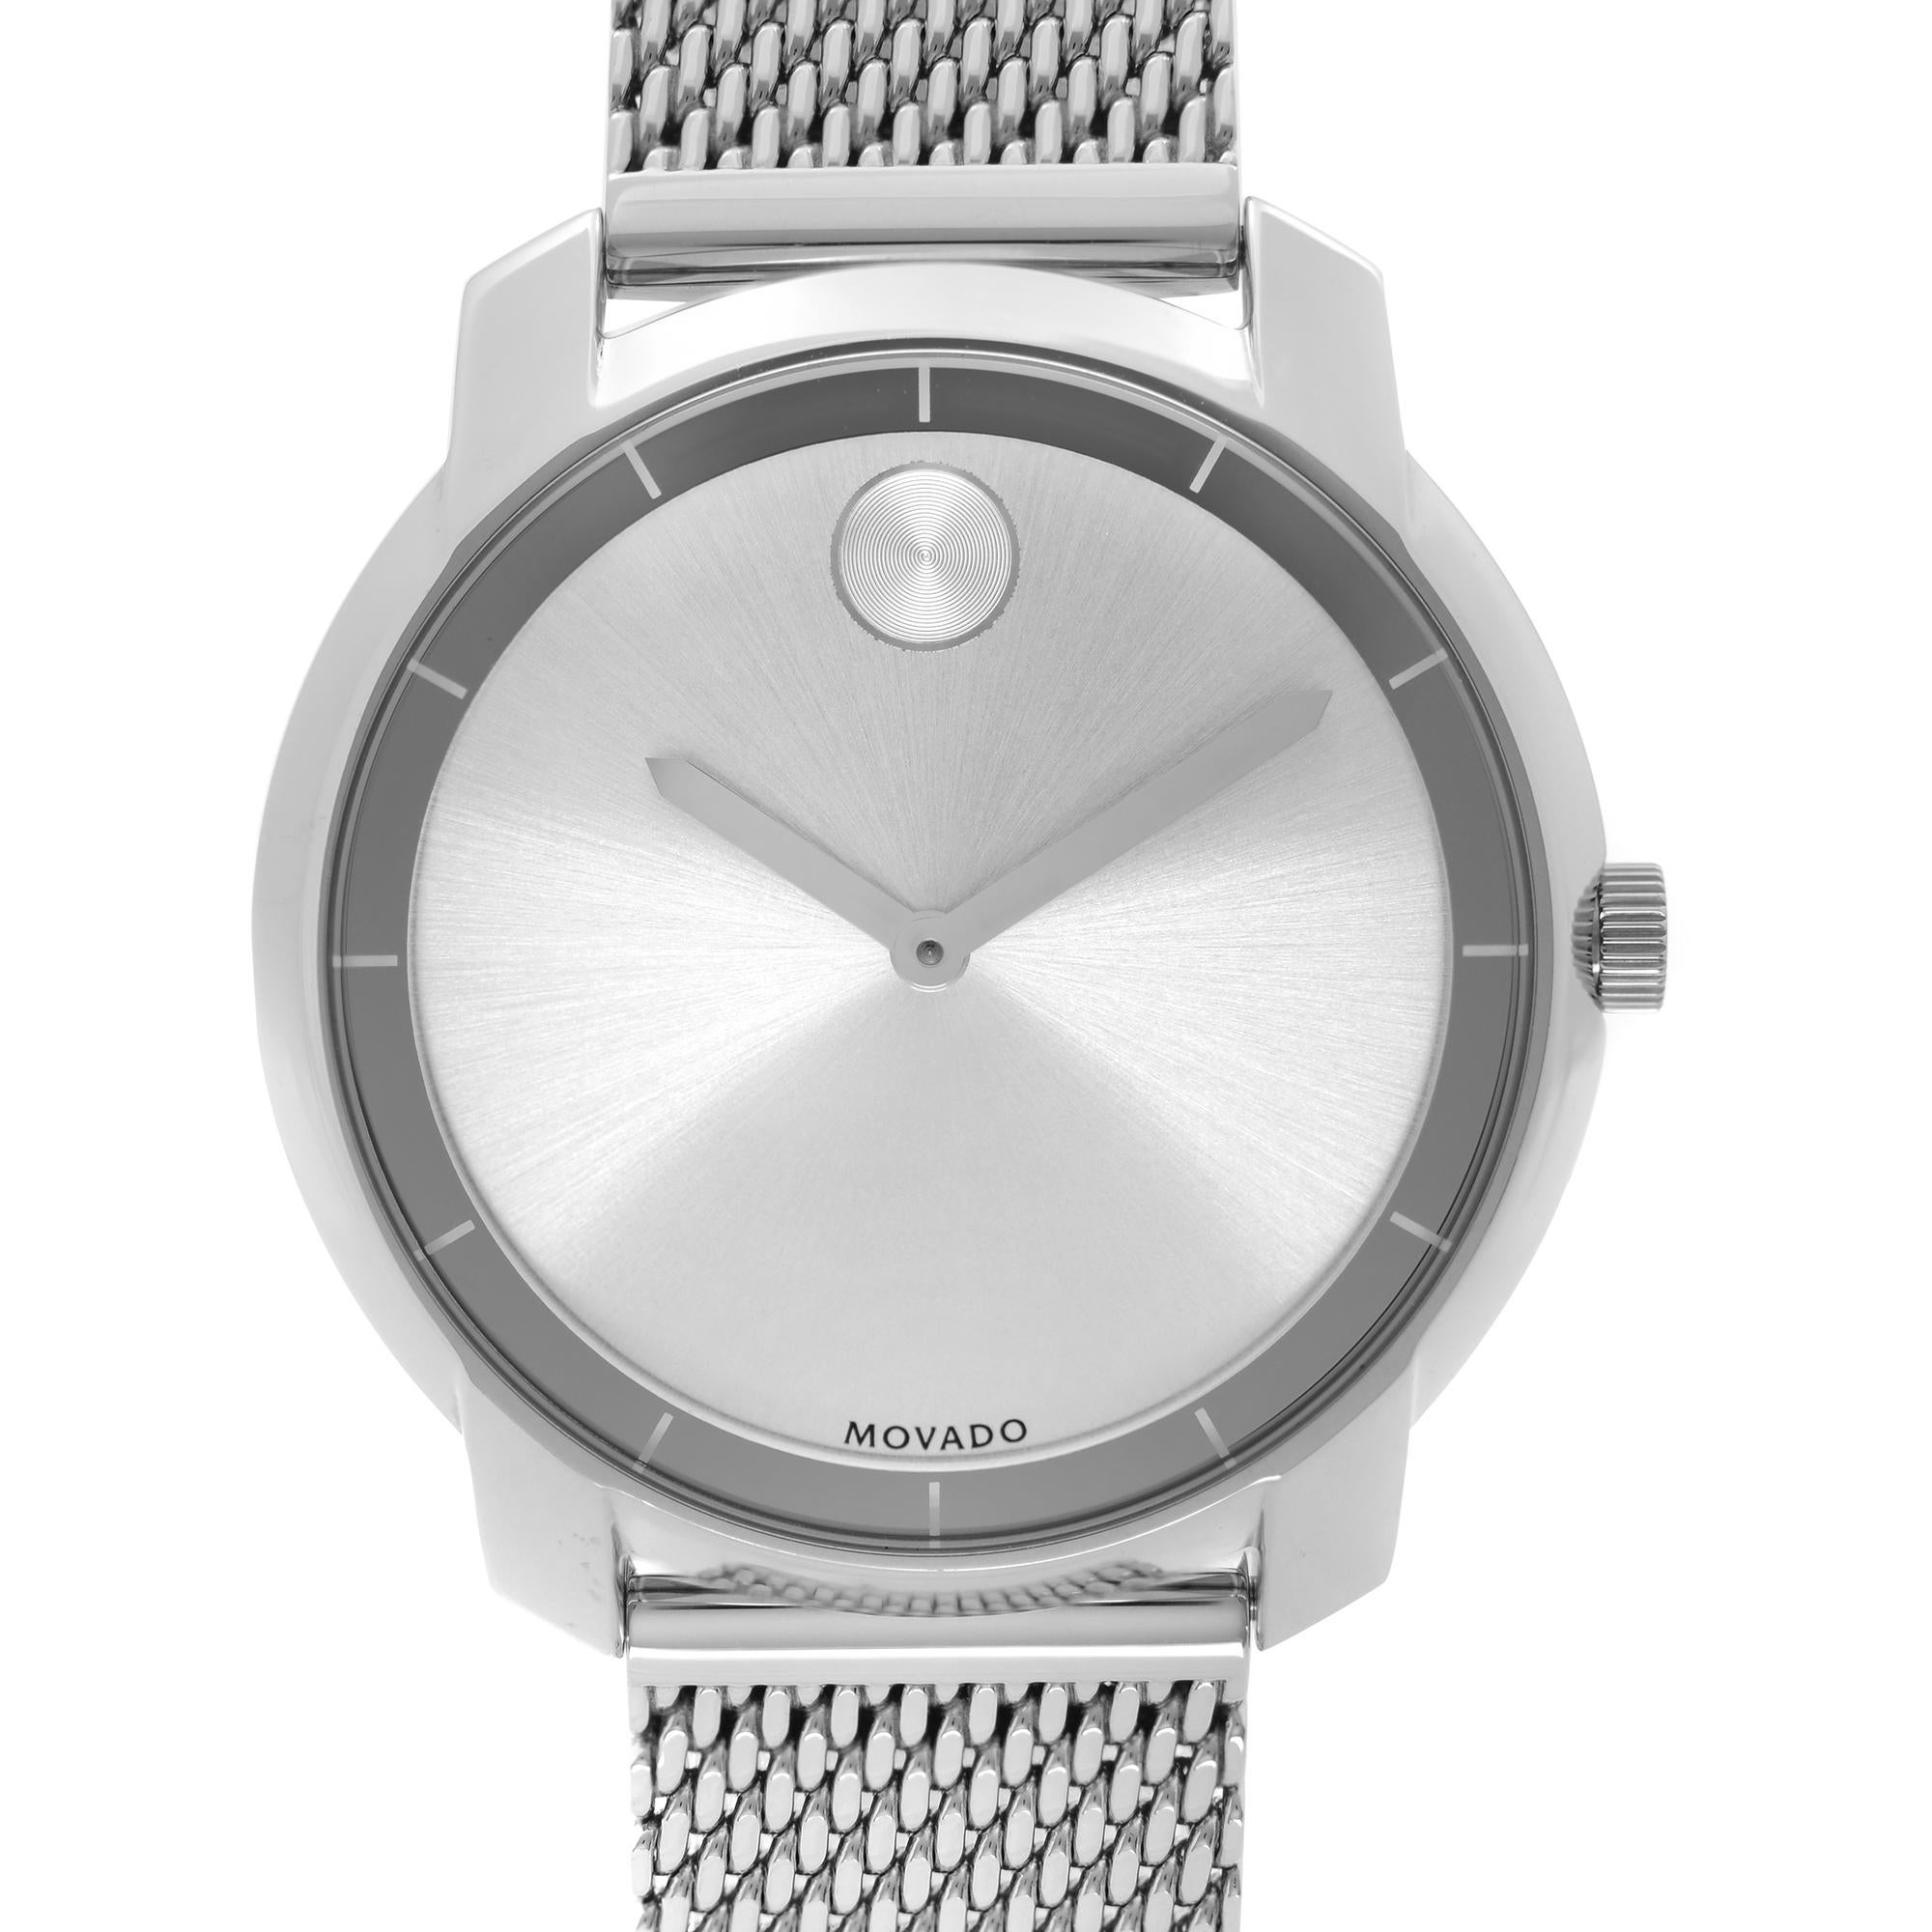 Display Model 36mm Movado Bold Stainless Steel Silver Dial Steel Mesh Ladies Quartz Watch 3600241. This Beautiful Timepiece Features: Stainless Steel Case with Stainless Steel Mesh Bracelet, Fixed Stainless Steel Bezel, Silver-Tone Dial with